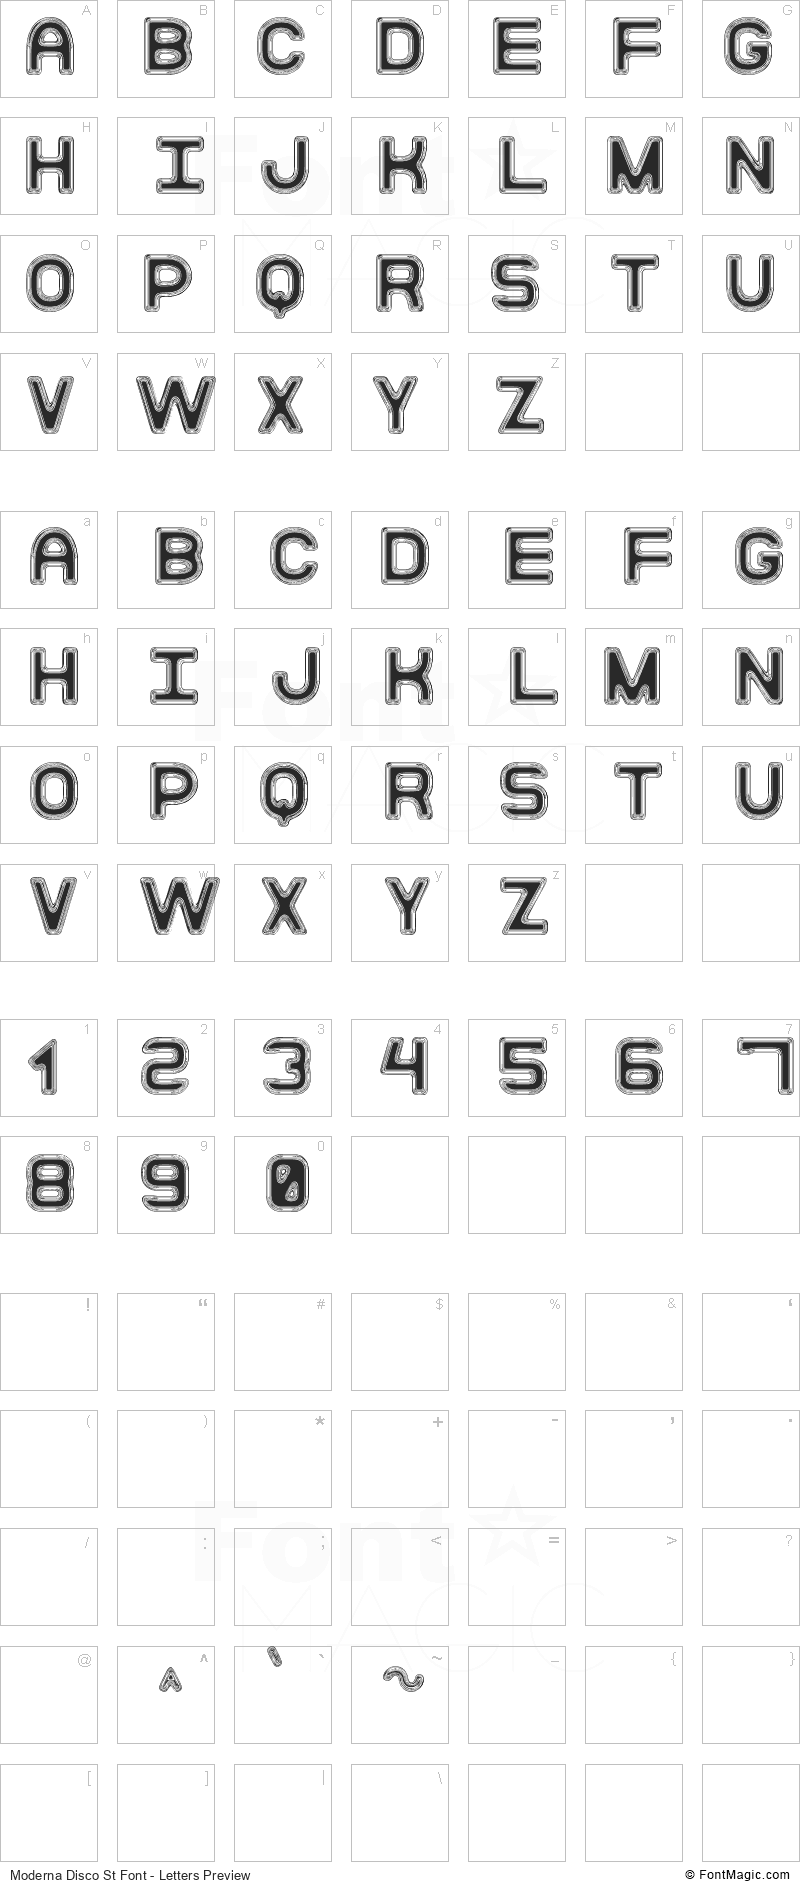 Moderna Disco St Font - All Latters Preview Chart